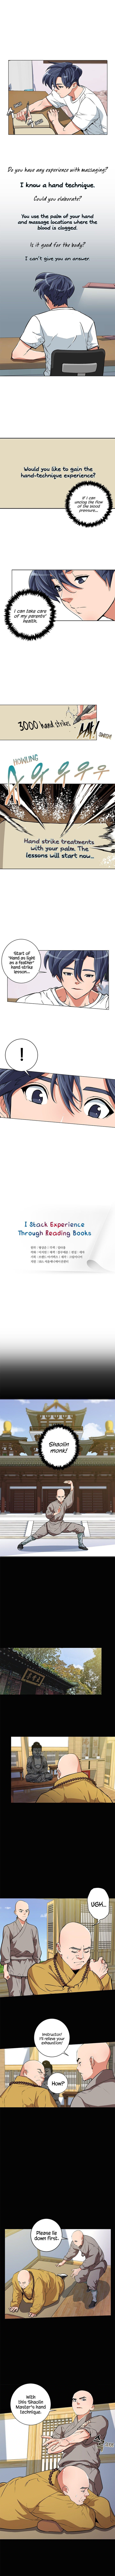 i_stack_experience_through_reading_books_26_1